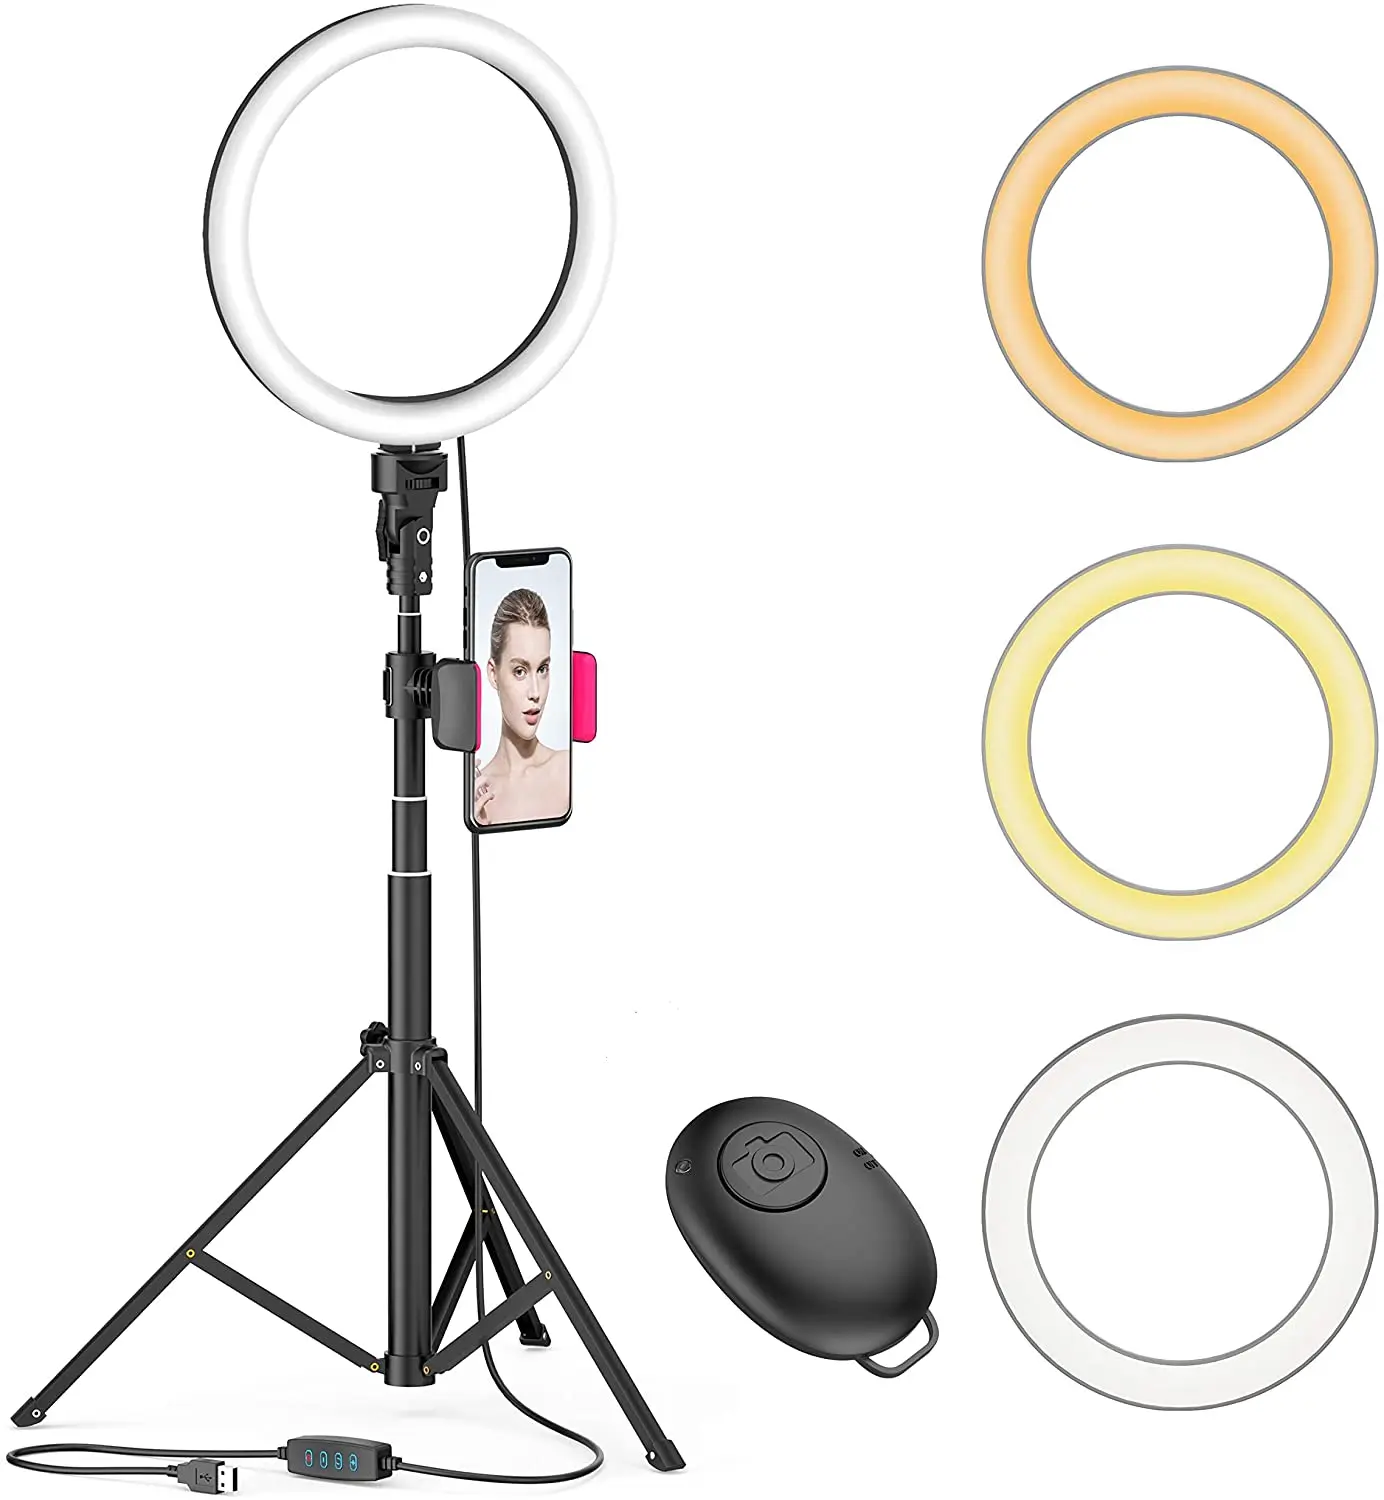 toelage dood Geniet 10 Inch Led Ring Light With Tripod Stand White Selfie Ringlight For Live  And Makeup Video - Buy Selfie Ring Light,Ring Light Led,Led Ring Light  Product on Alibaba.com